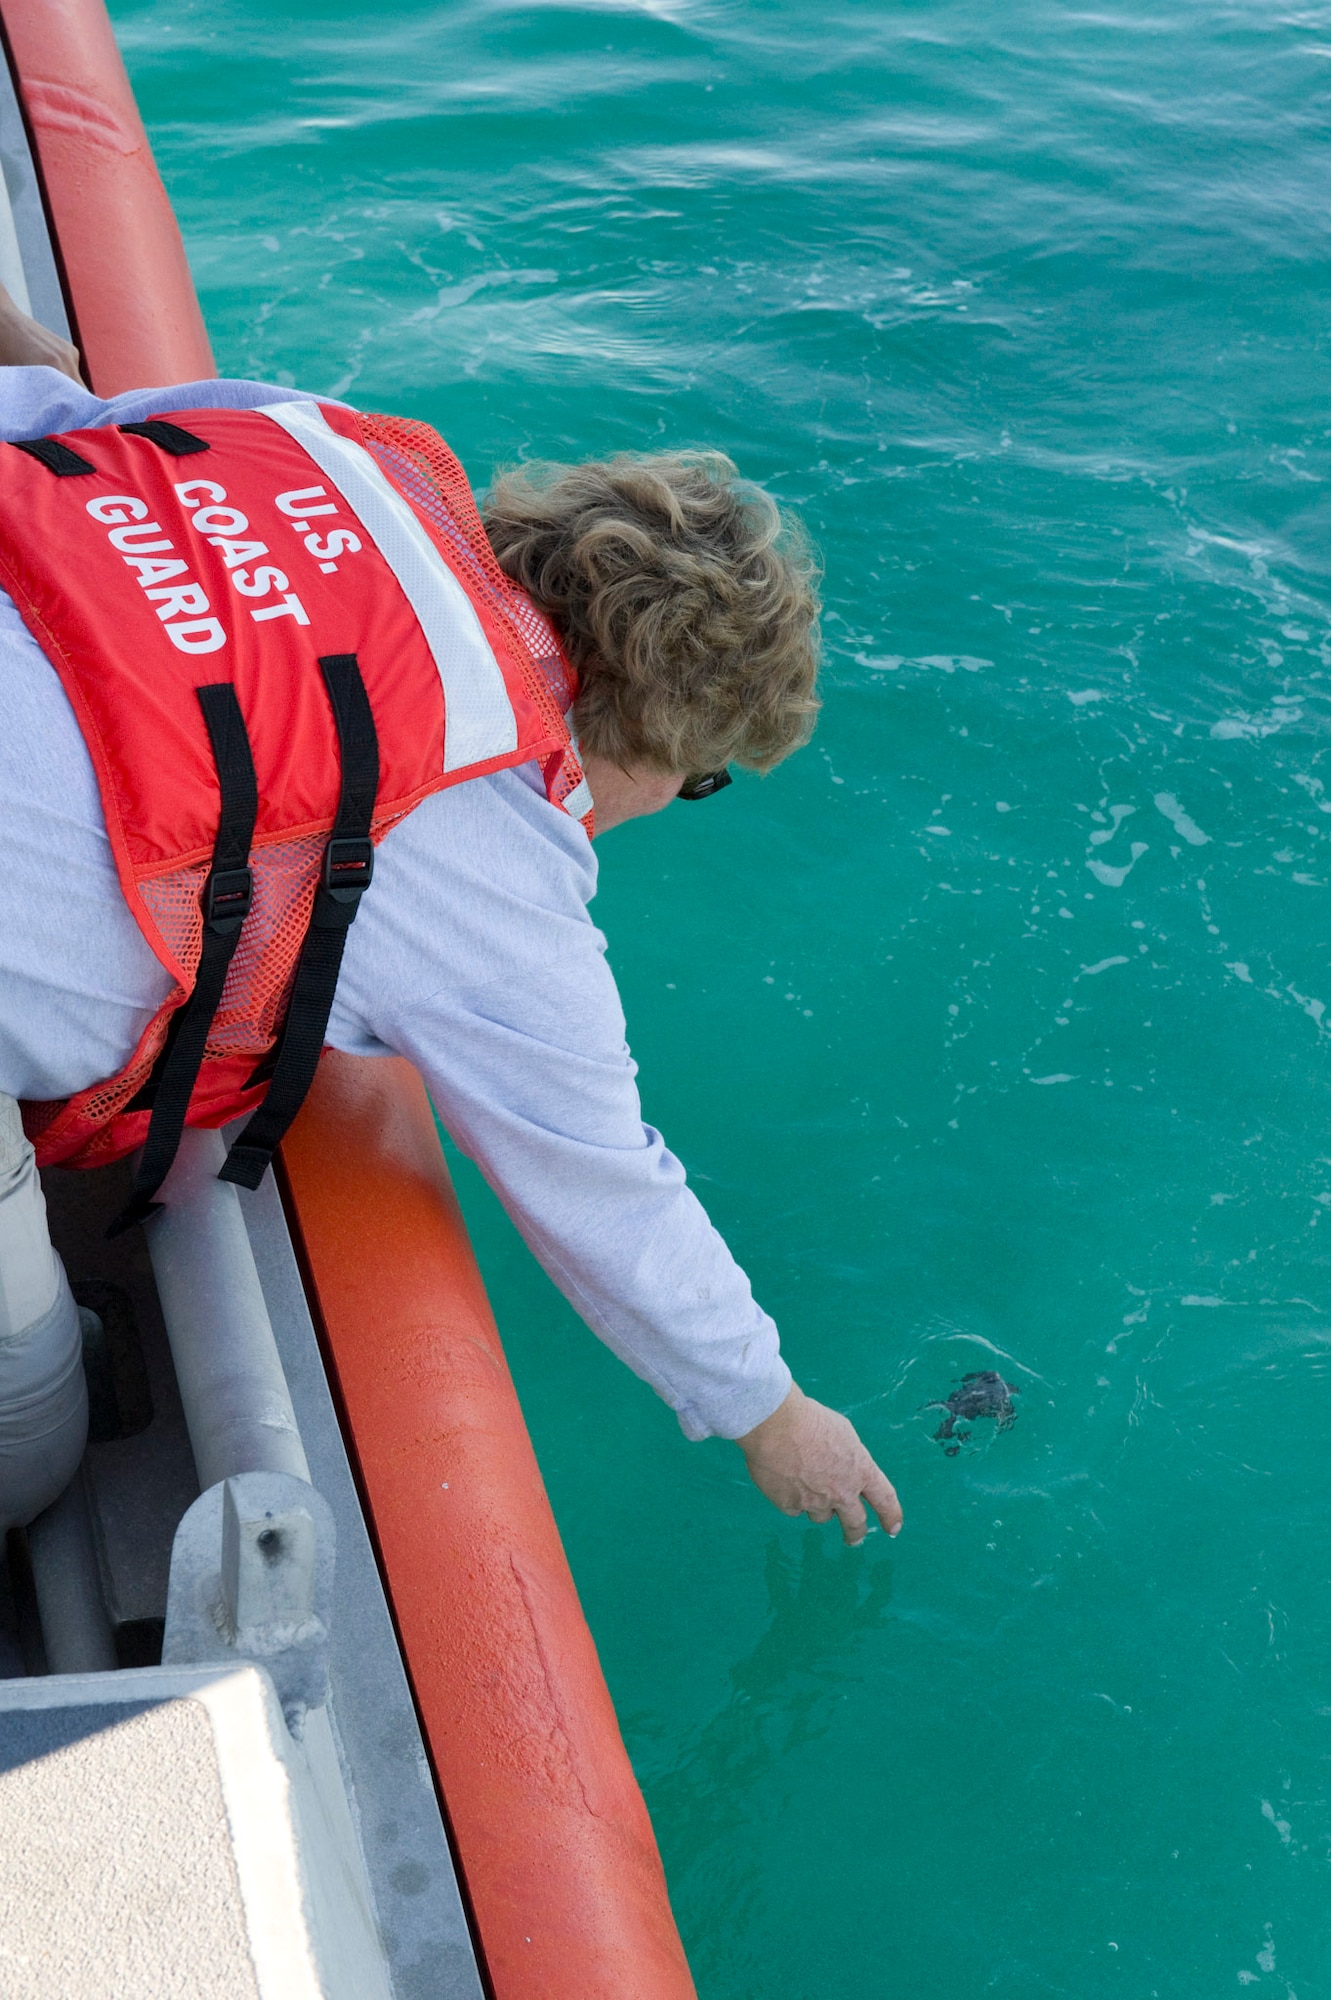 Martha Carroll, a biologist with the 45th Civil Engineer Squadron Asset Management Flight, releases a Green sea turtle hatching into the ocean from the deck of a U.S. Coast Guard search and rescue boat 20 miles off shore. (Photo by Julie Dayringer)